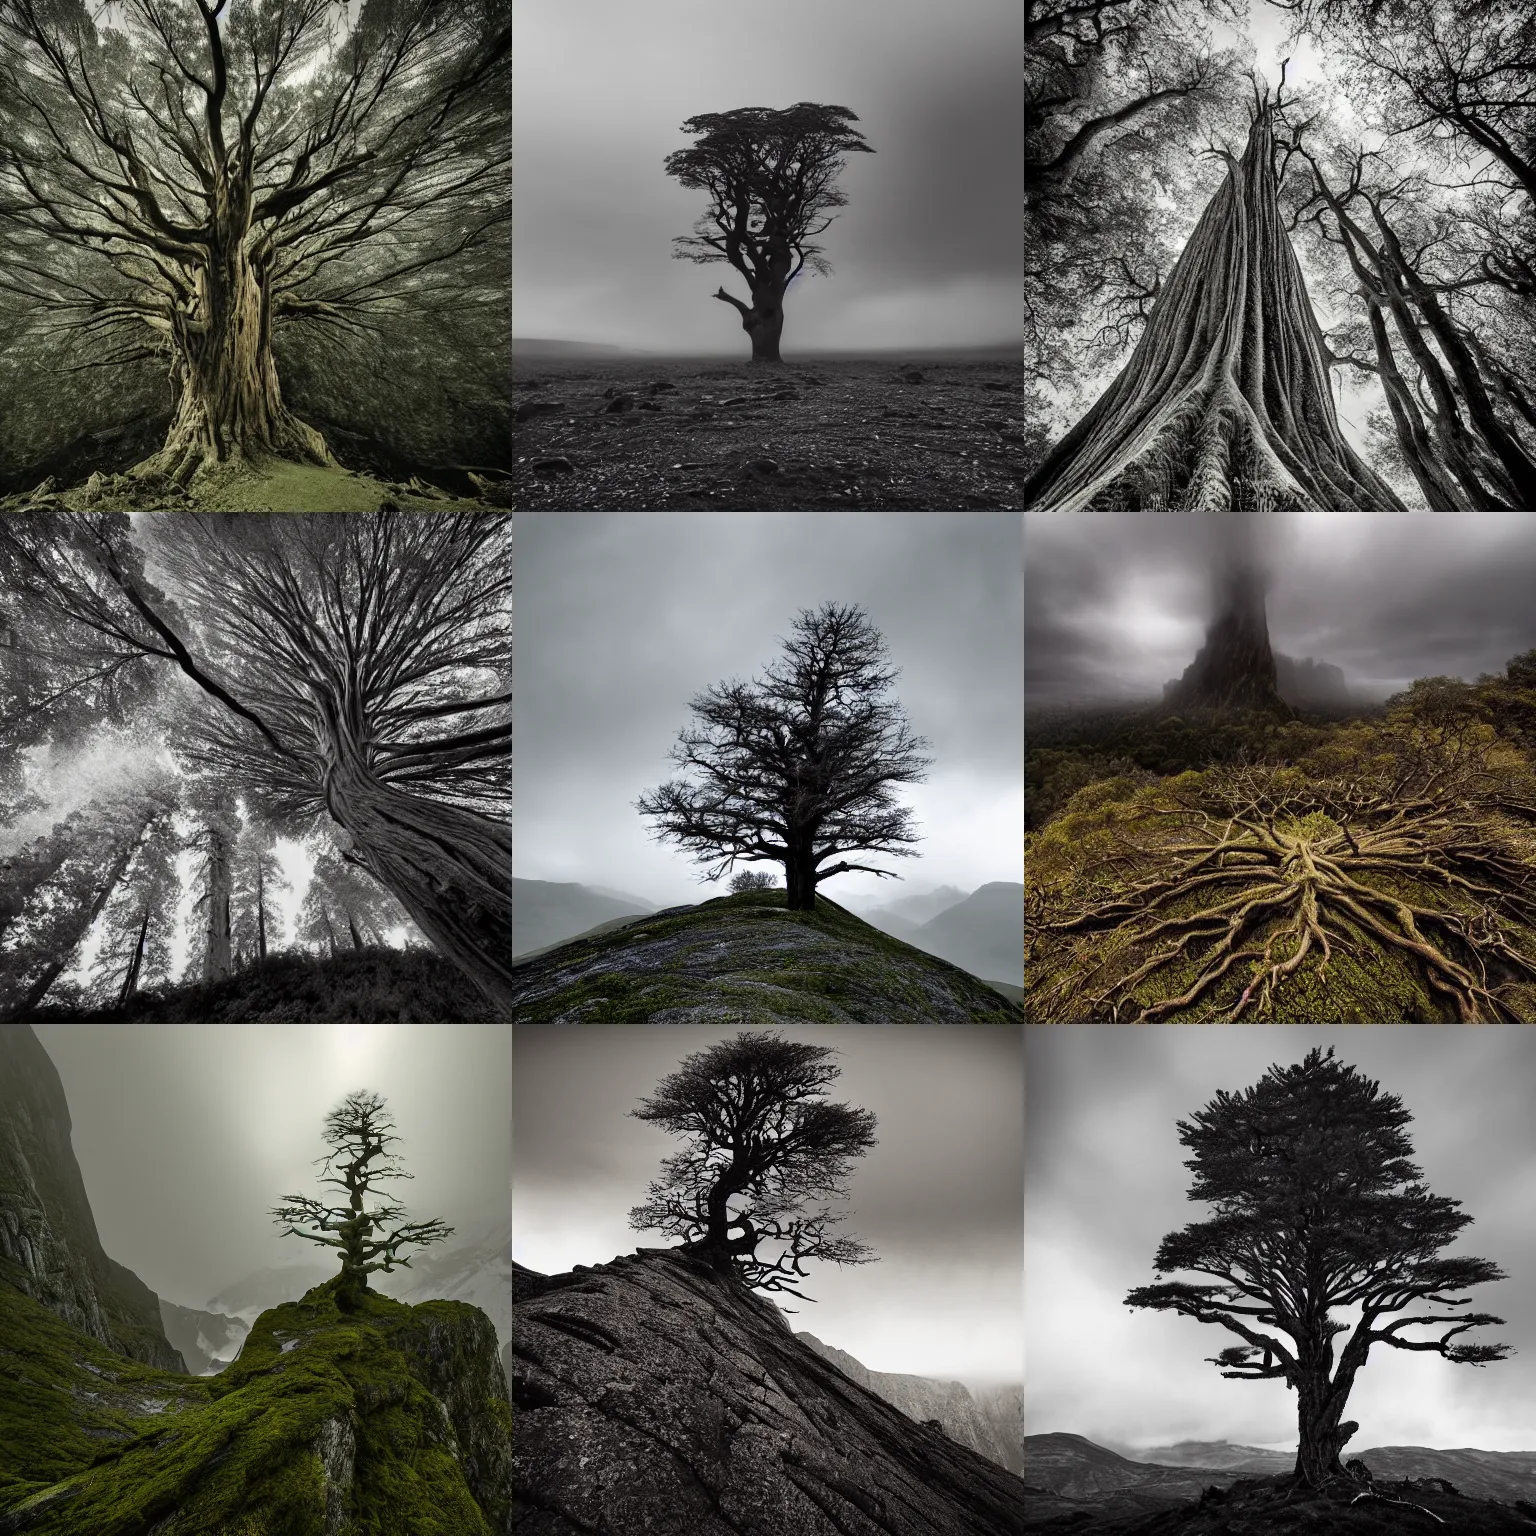 Prompt: majestic, myriad, imposing, endless, mysterious, gloomy, isolated, tranquil, rugged, vertigo - inducing, immense, foreboding tree